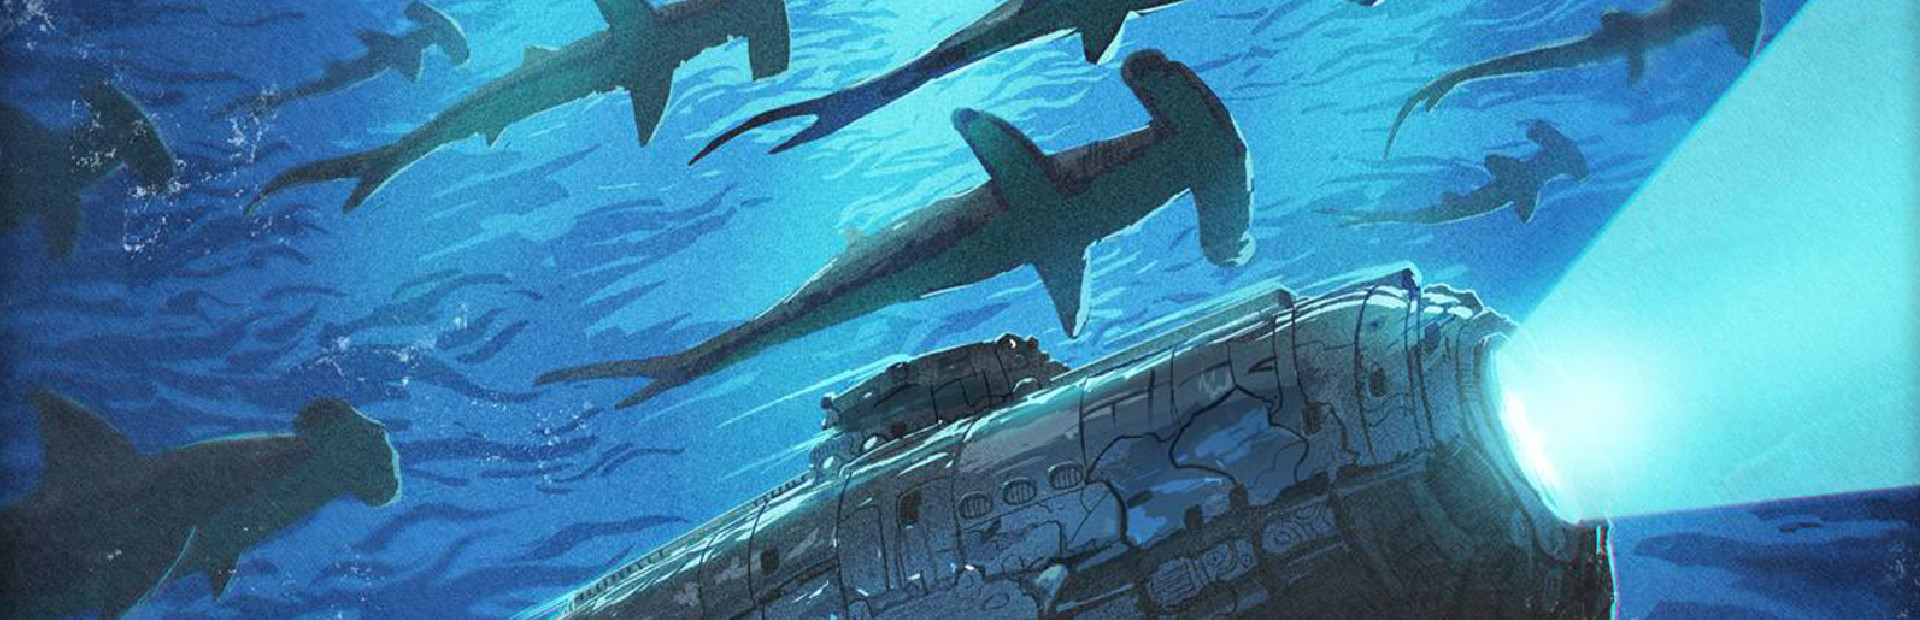 The Aquatic Adventure of the Last Human cover image